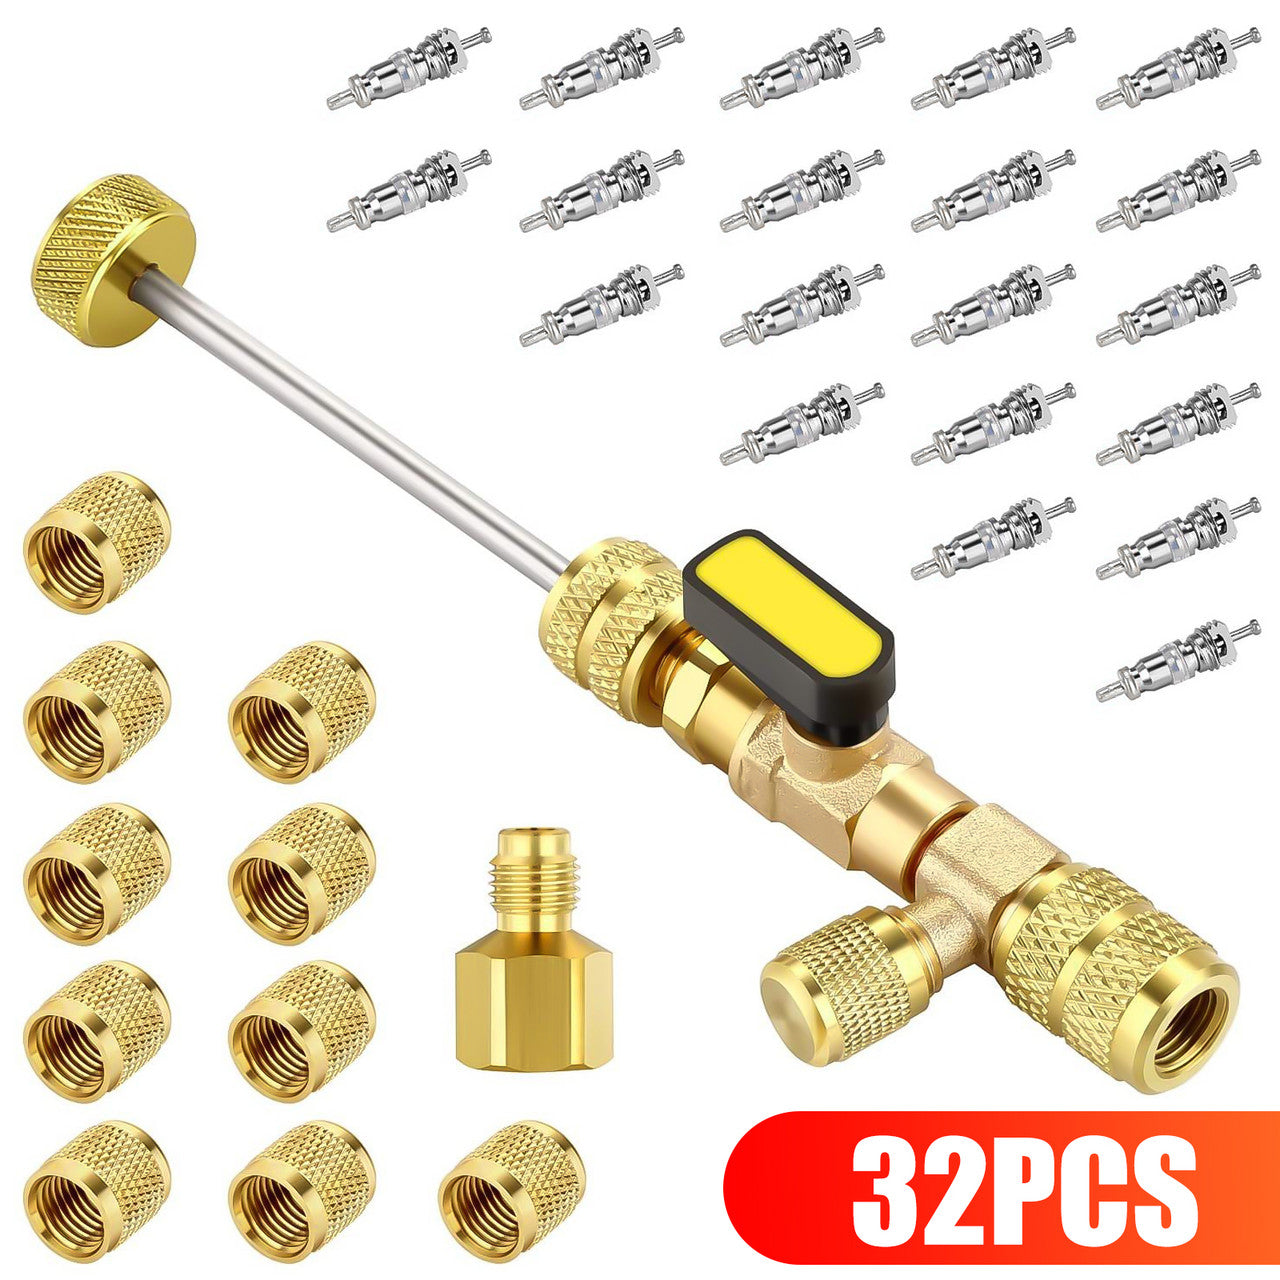 32 Pieces Valve Core Remover Installer Tool - Dual Size Sae 1/4 & 5/16 Port, Compatible with R22 R12 R407 R410 R404 R32 R600 A/C